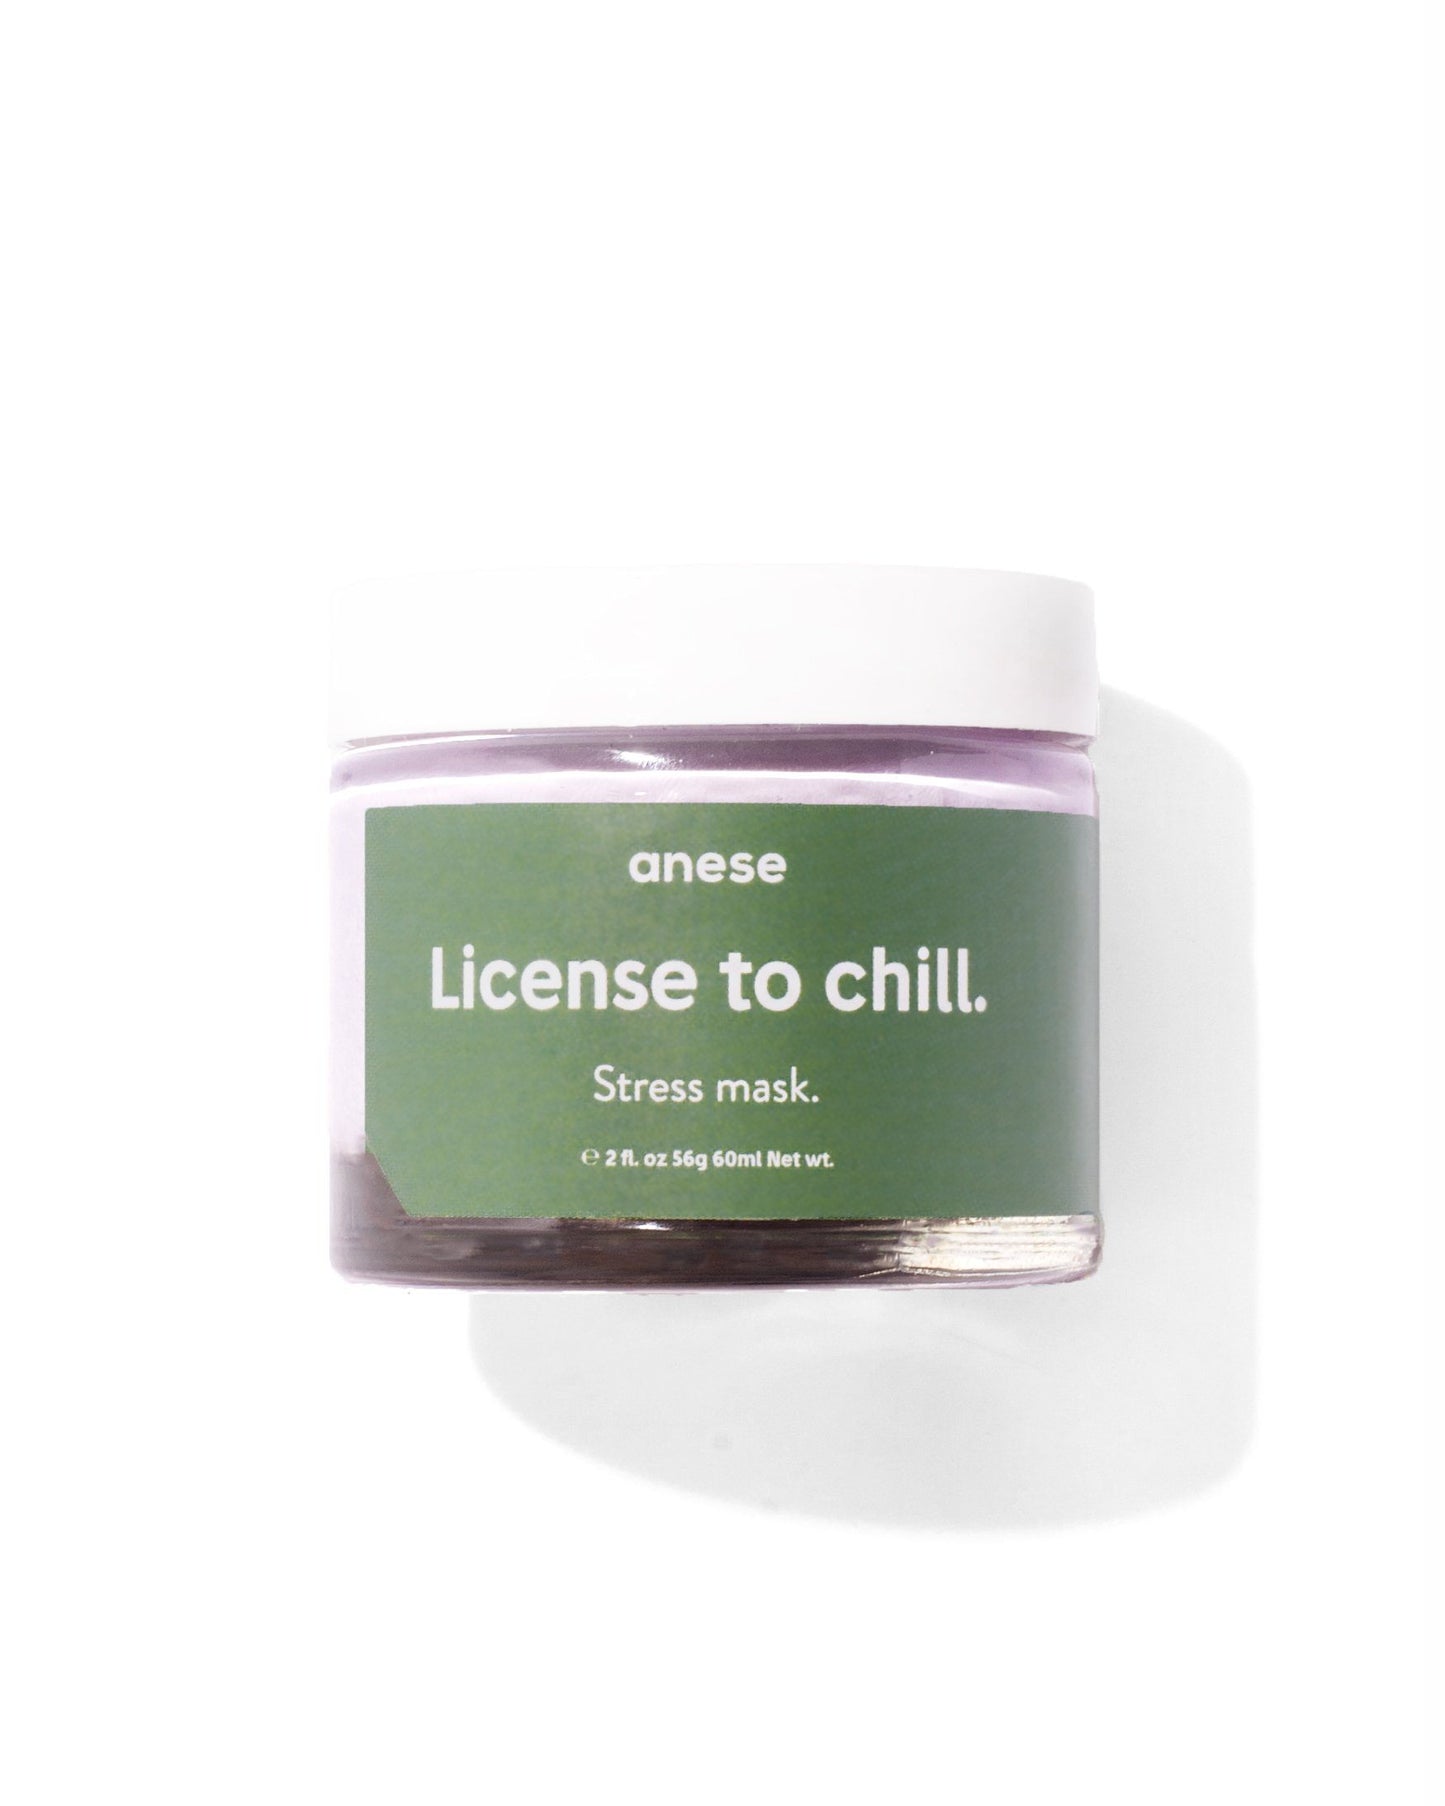 License to chill. The Stress Mask. Anese